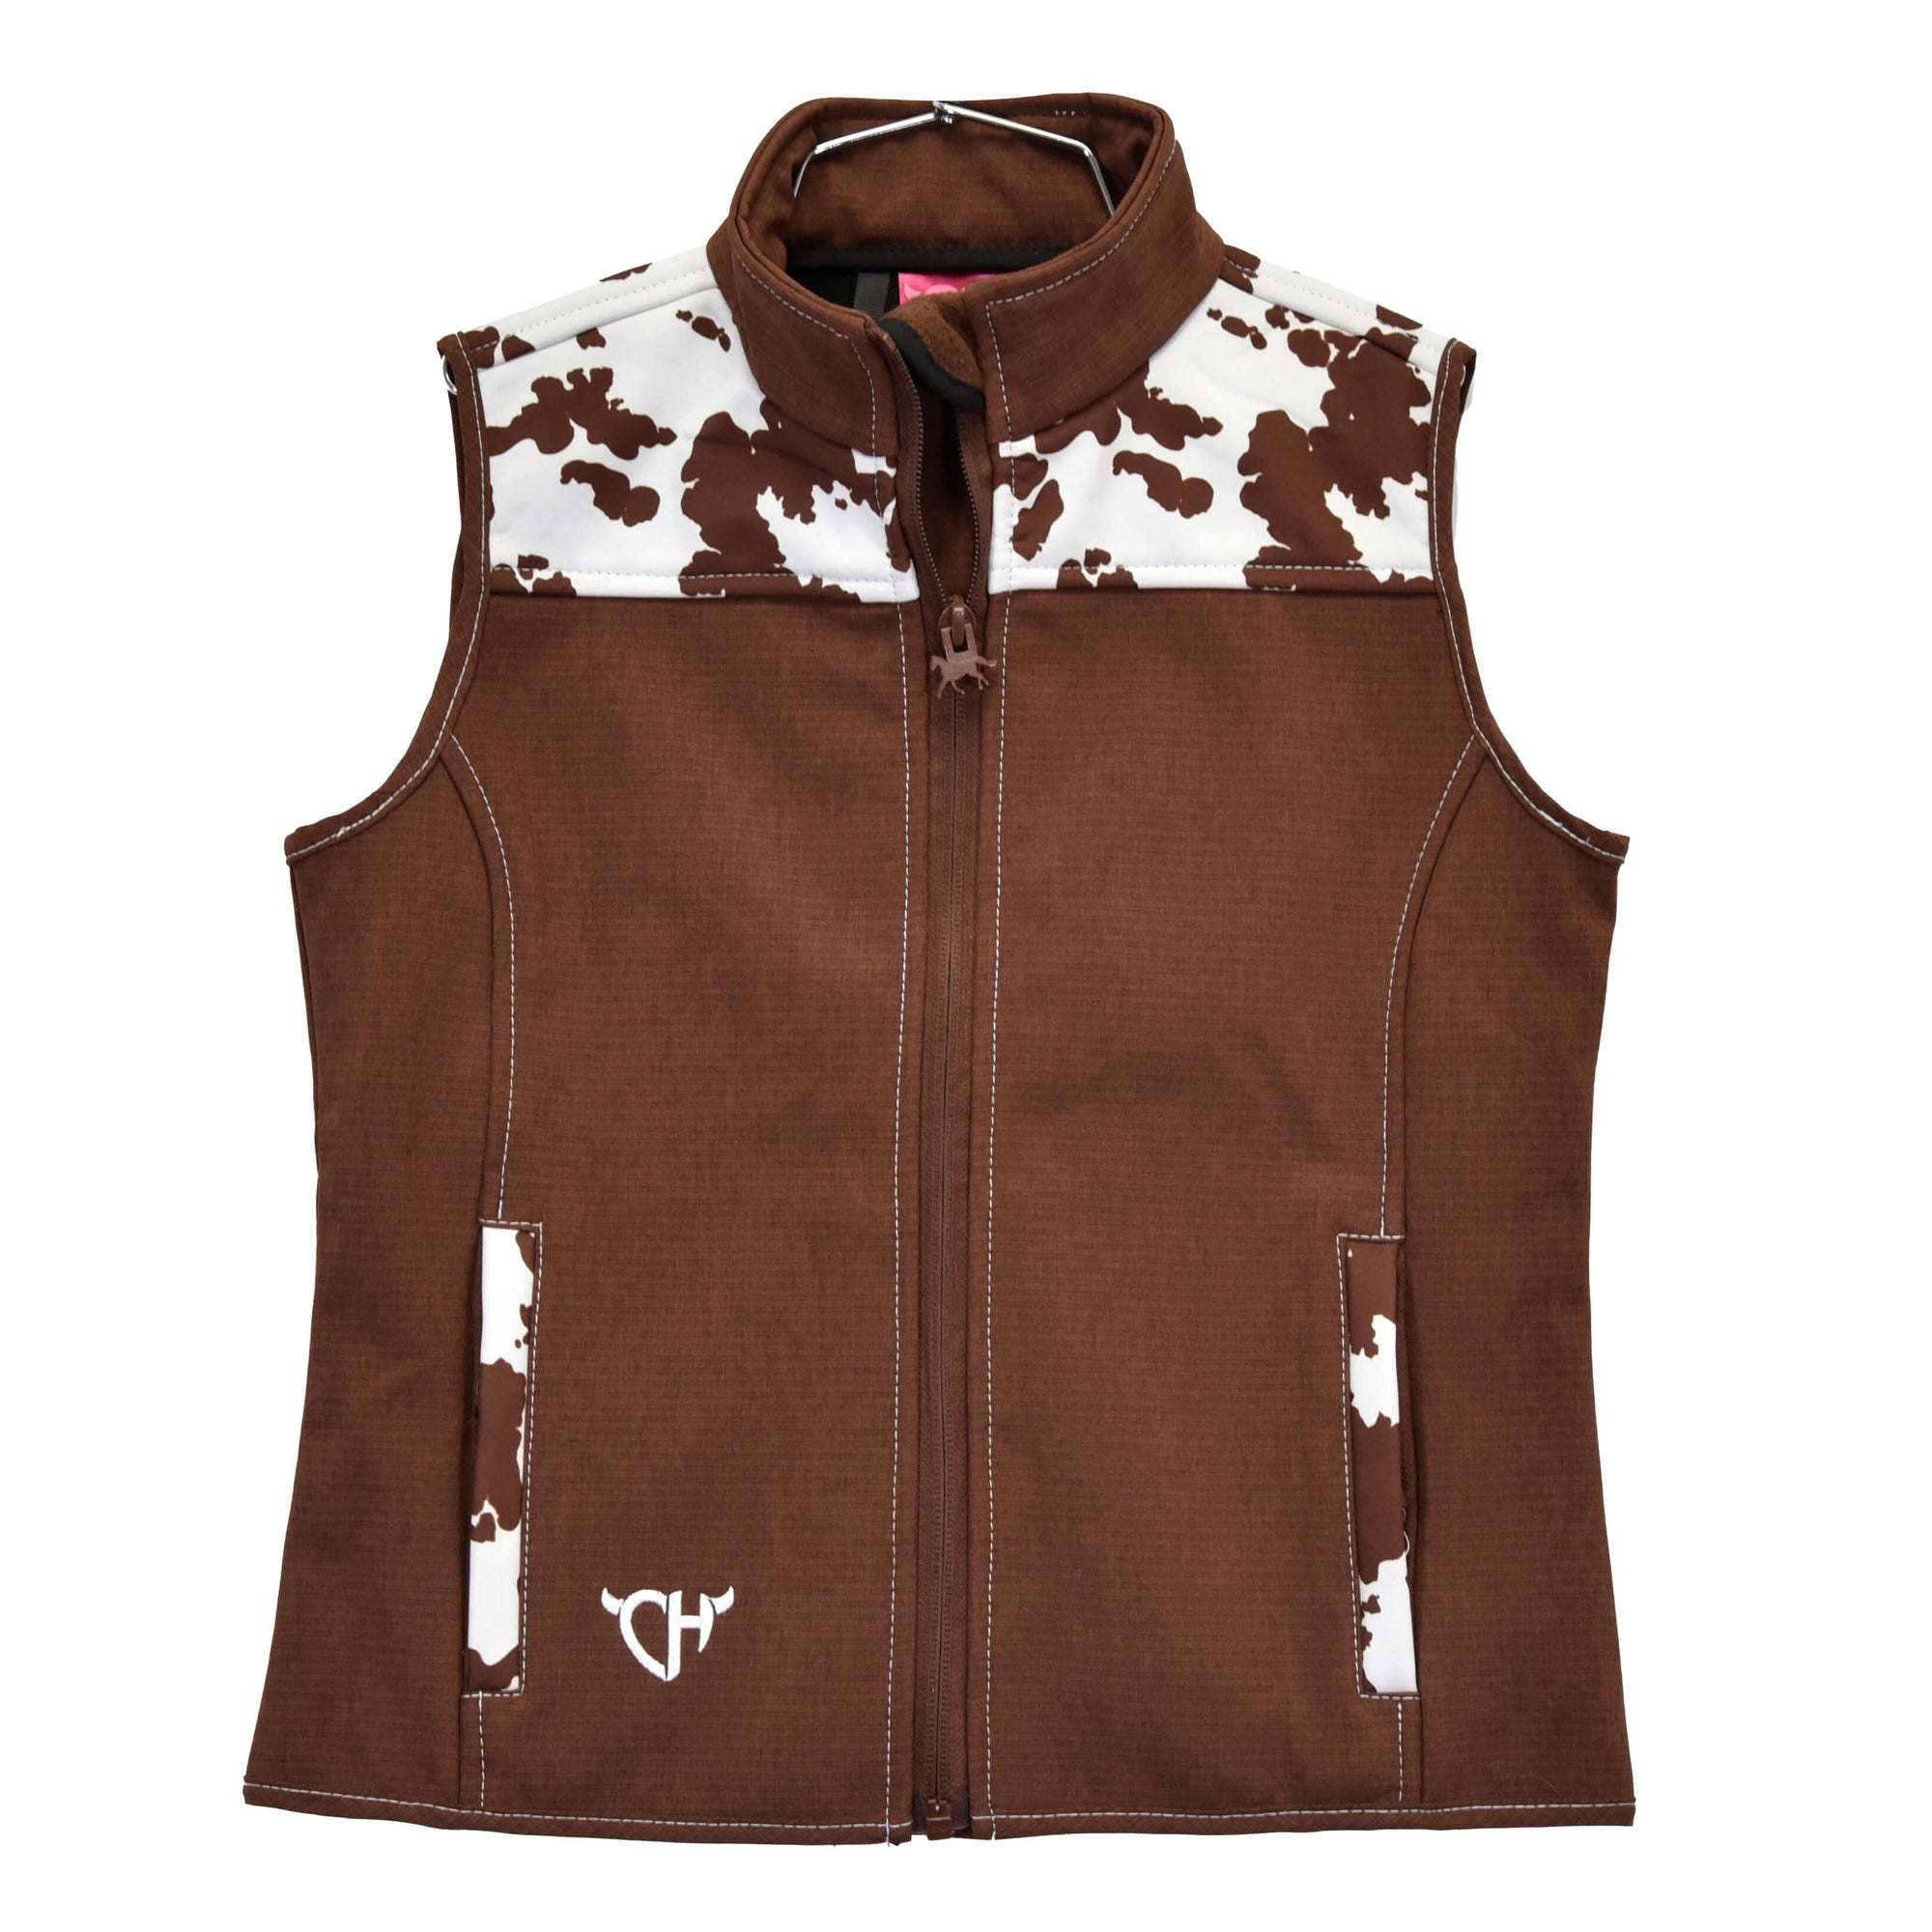 Youth Girl's Cowgirl Hardware Brown Cowprint Yoke Poly Shell Vest from Cowboy Hardware